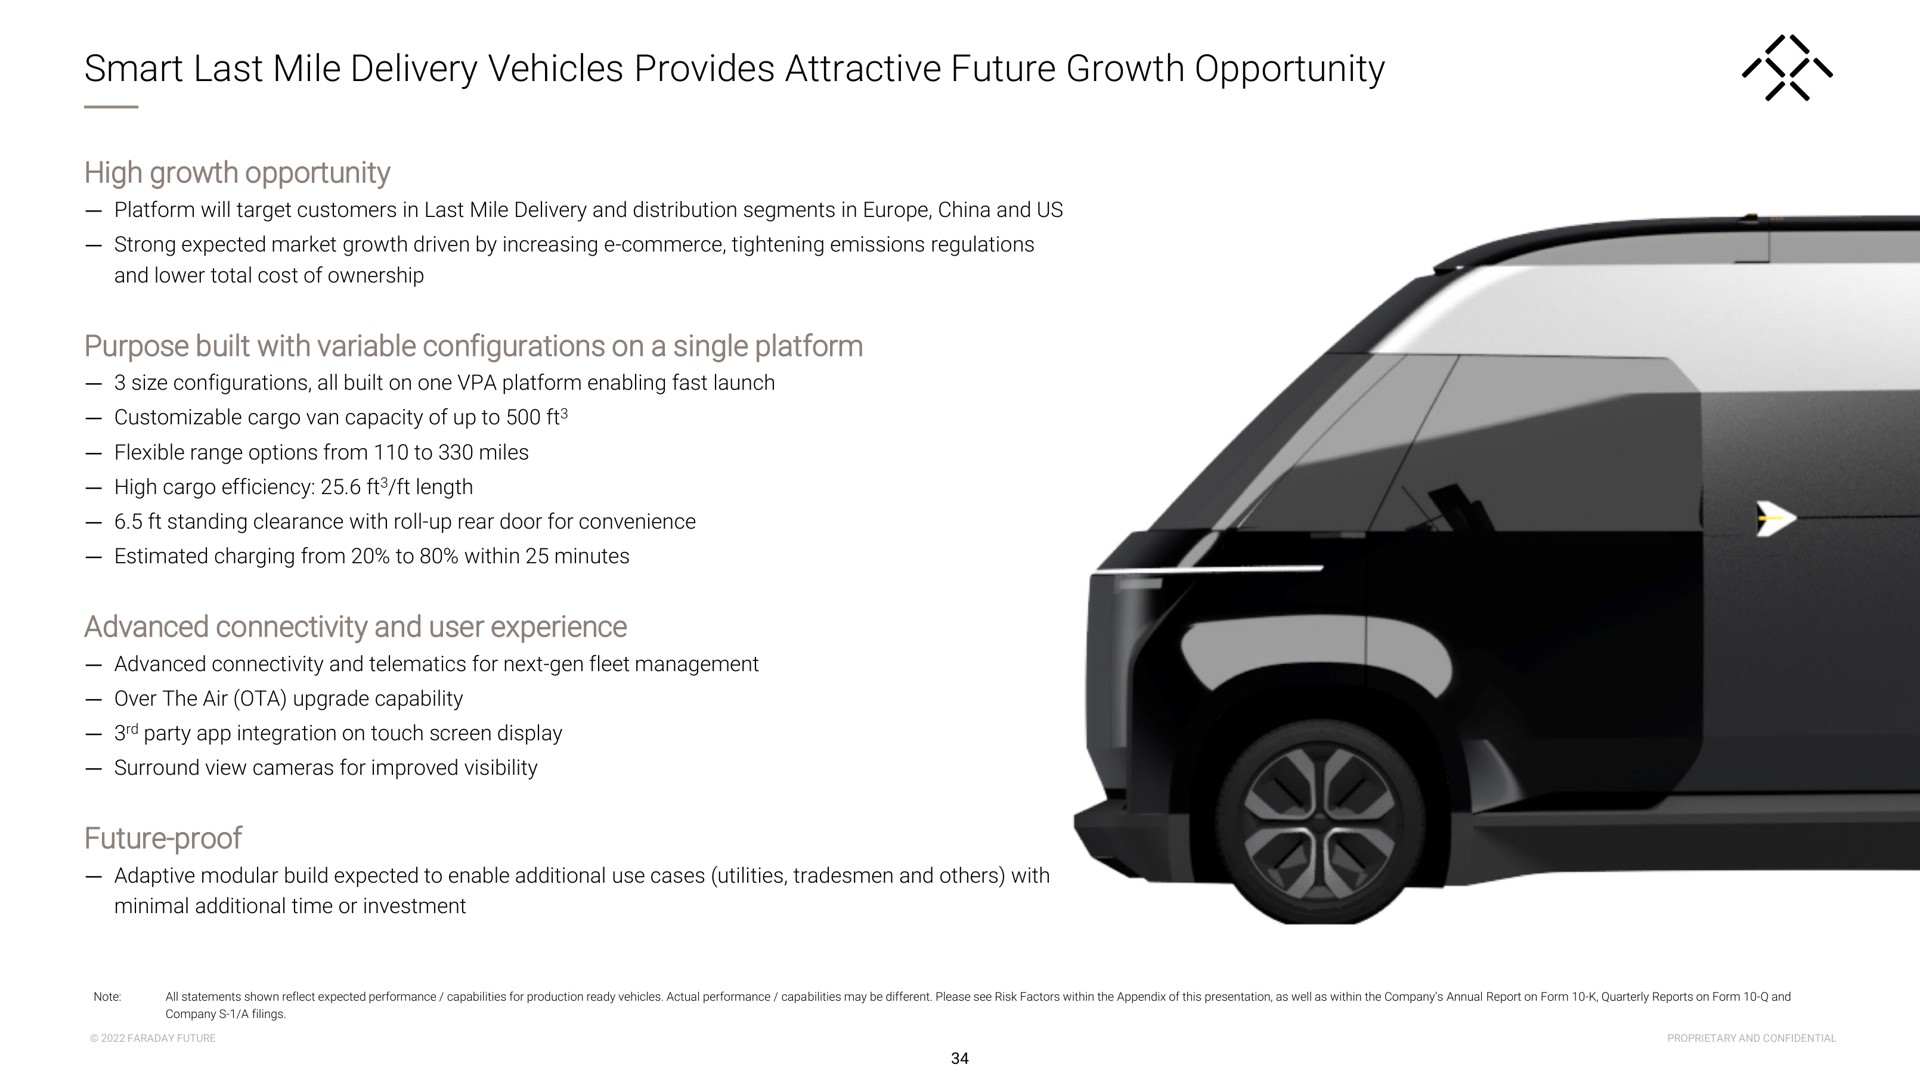 smart last mile delivery vehicles provides attractive future growth opportunity high growth opportunity purpose built with variable configurations on a single platform advanced connectivity and user experience future proof non | Faraday Future